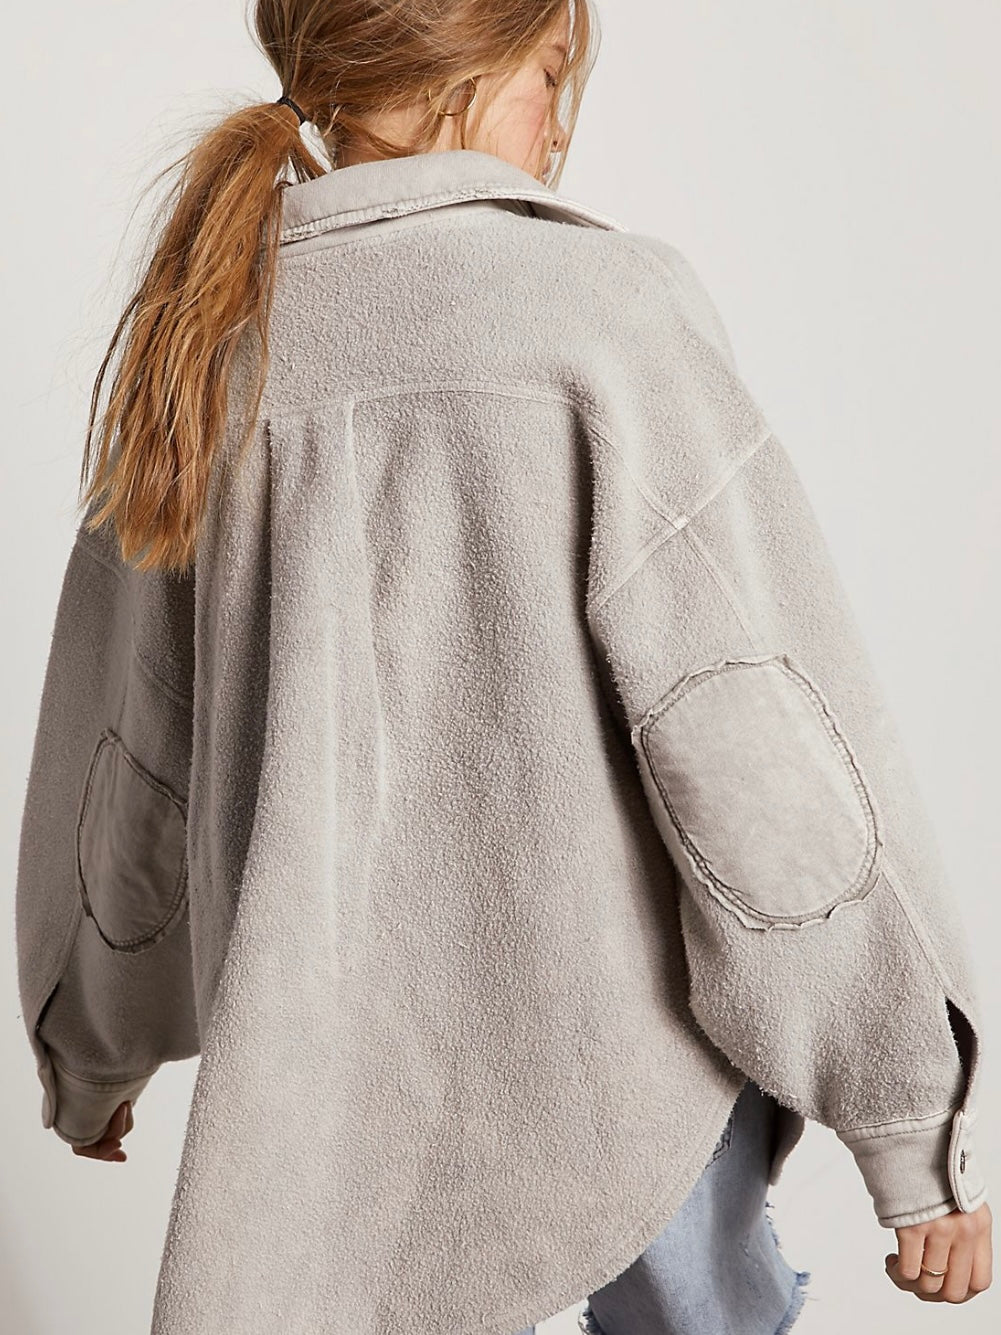 Free People Ruby Jacket in Stone